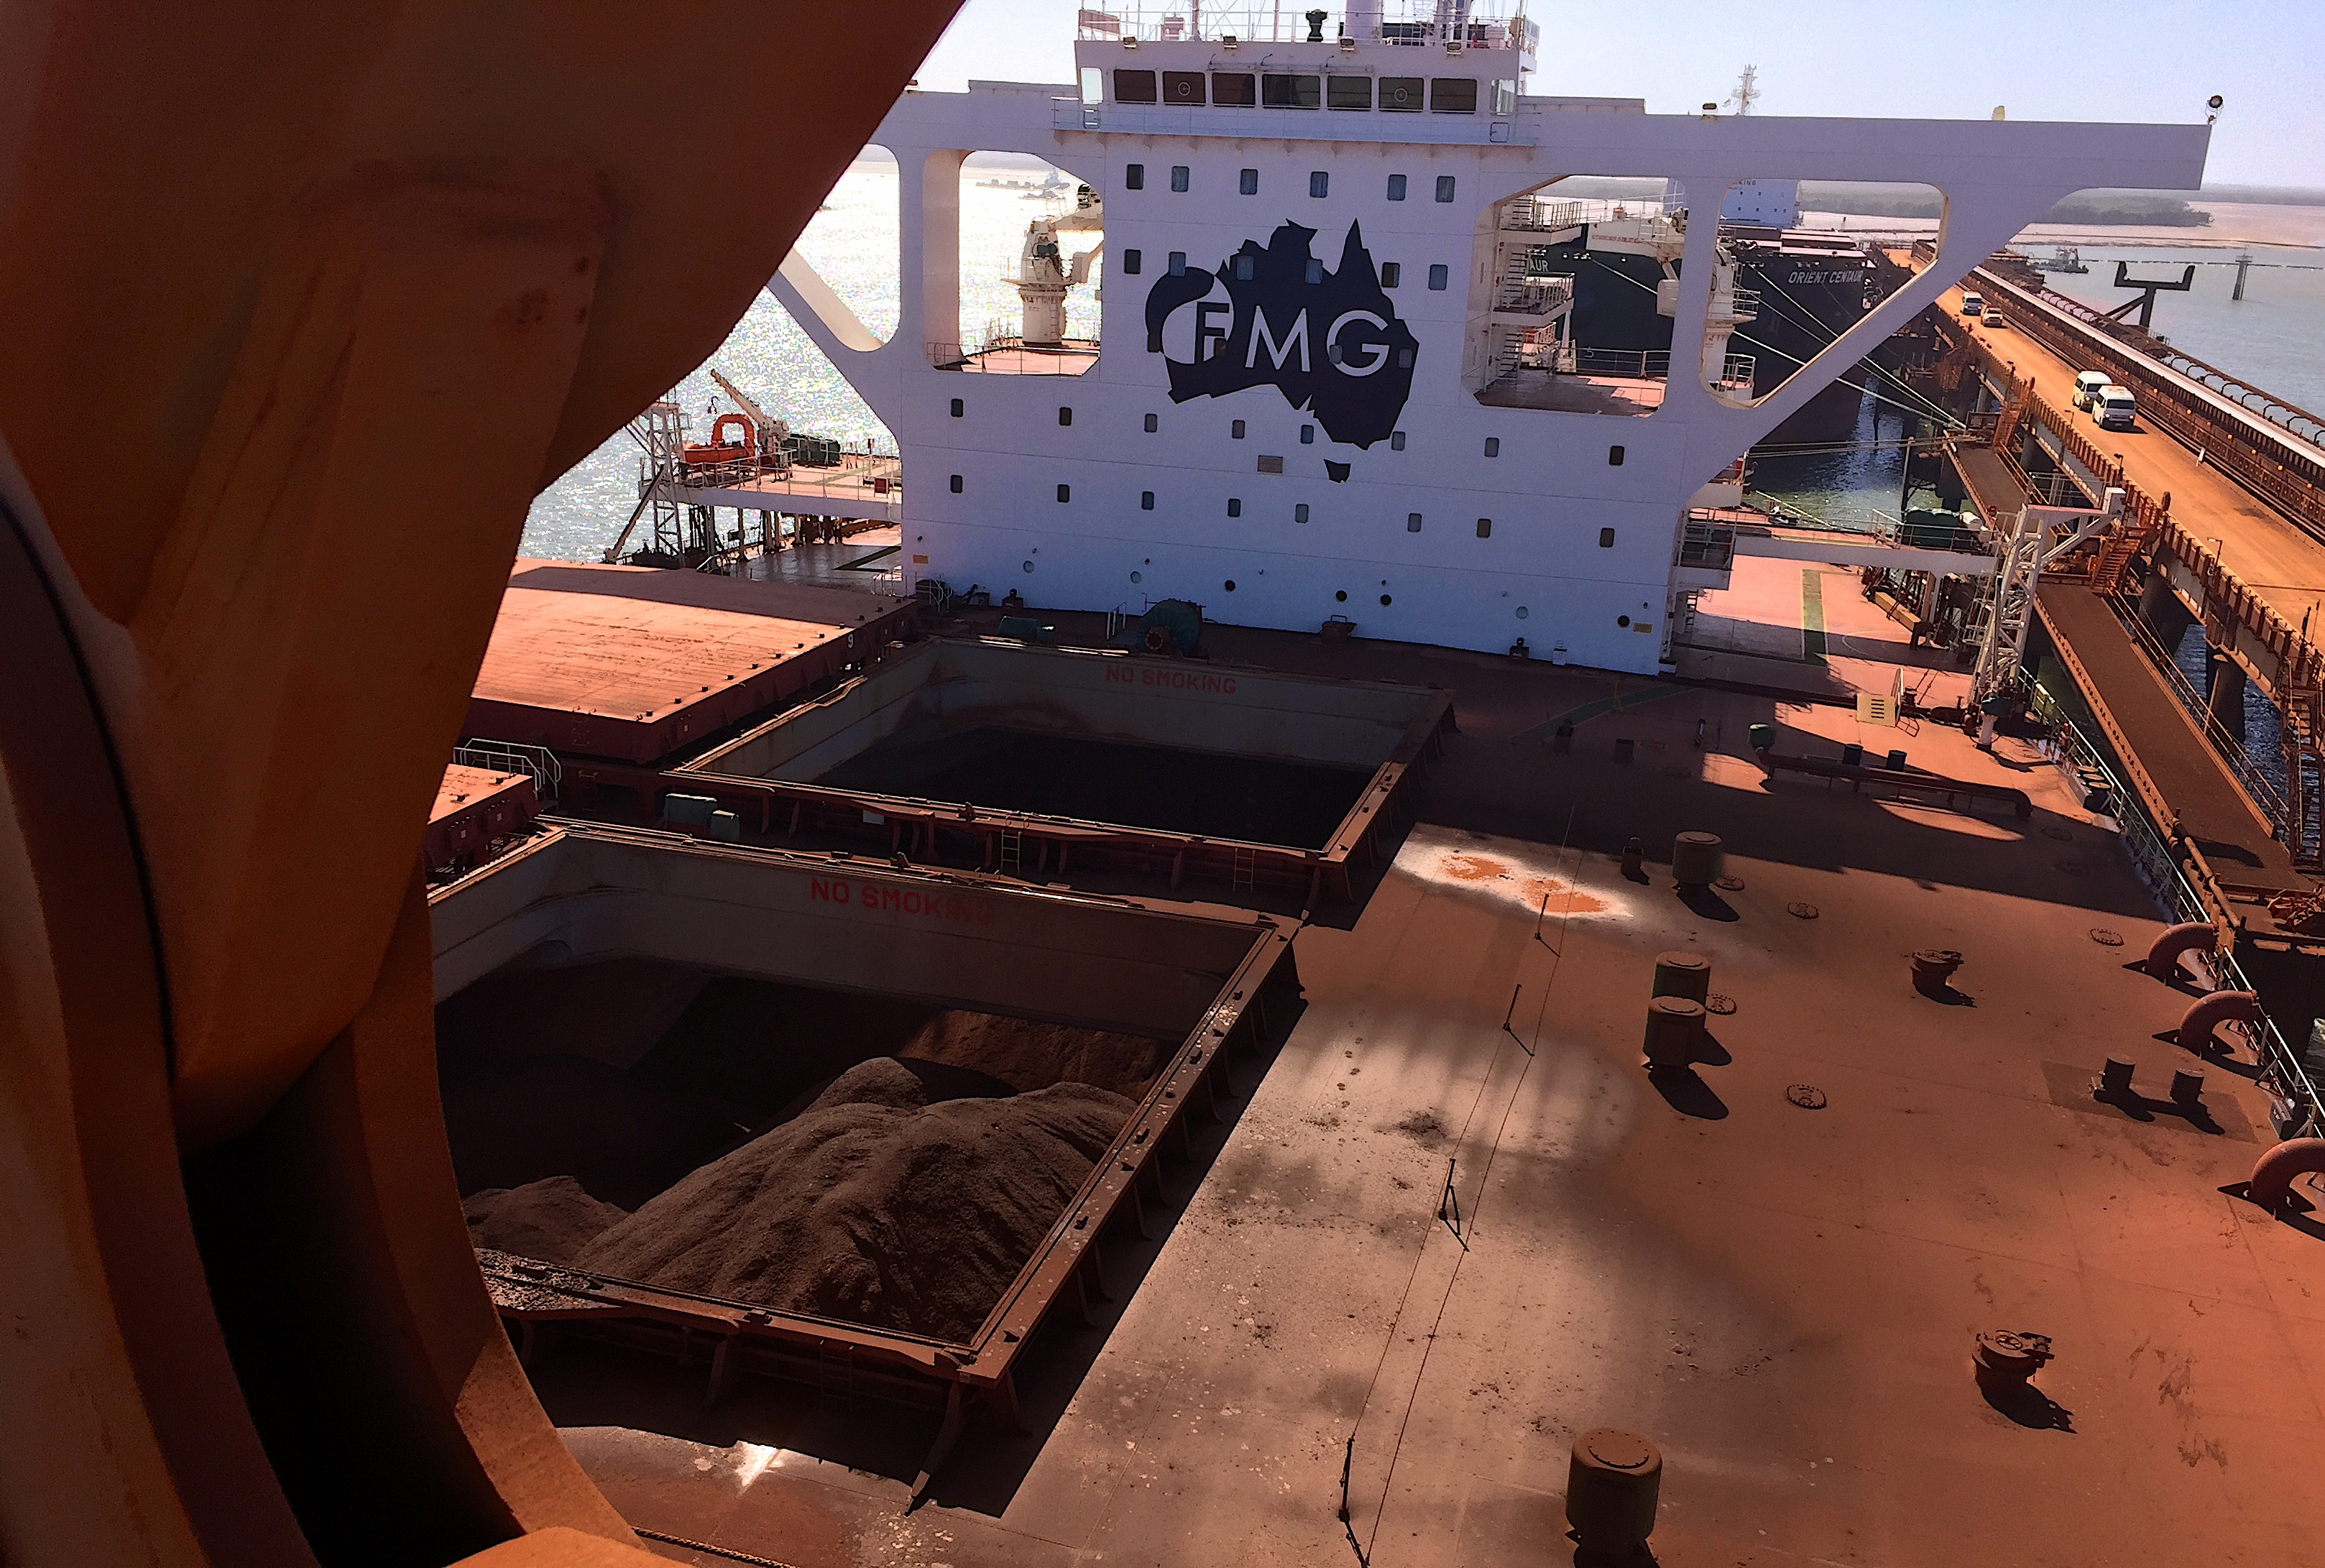 The logo of Australia's Fortescue Metals Group can be seen on a bulk carrier as it is loaded with iron ore at the coastal town of Port Hedland in Western Australia